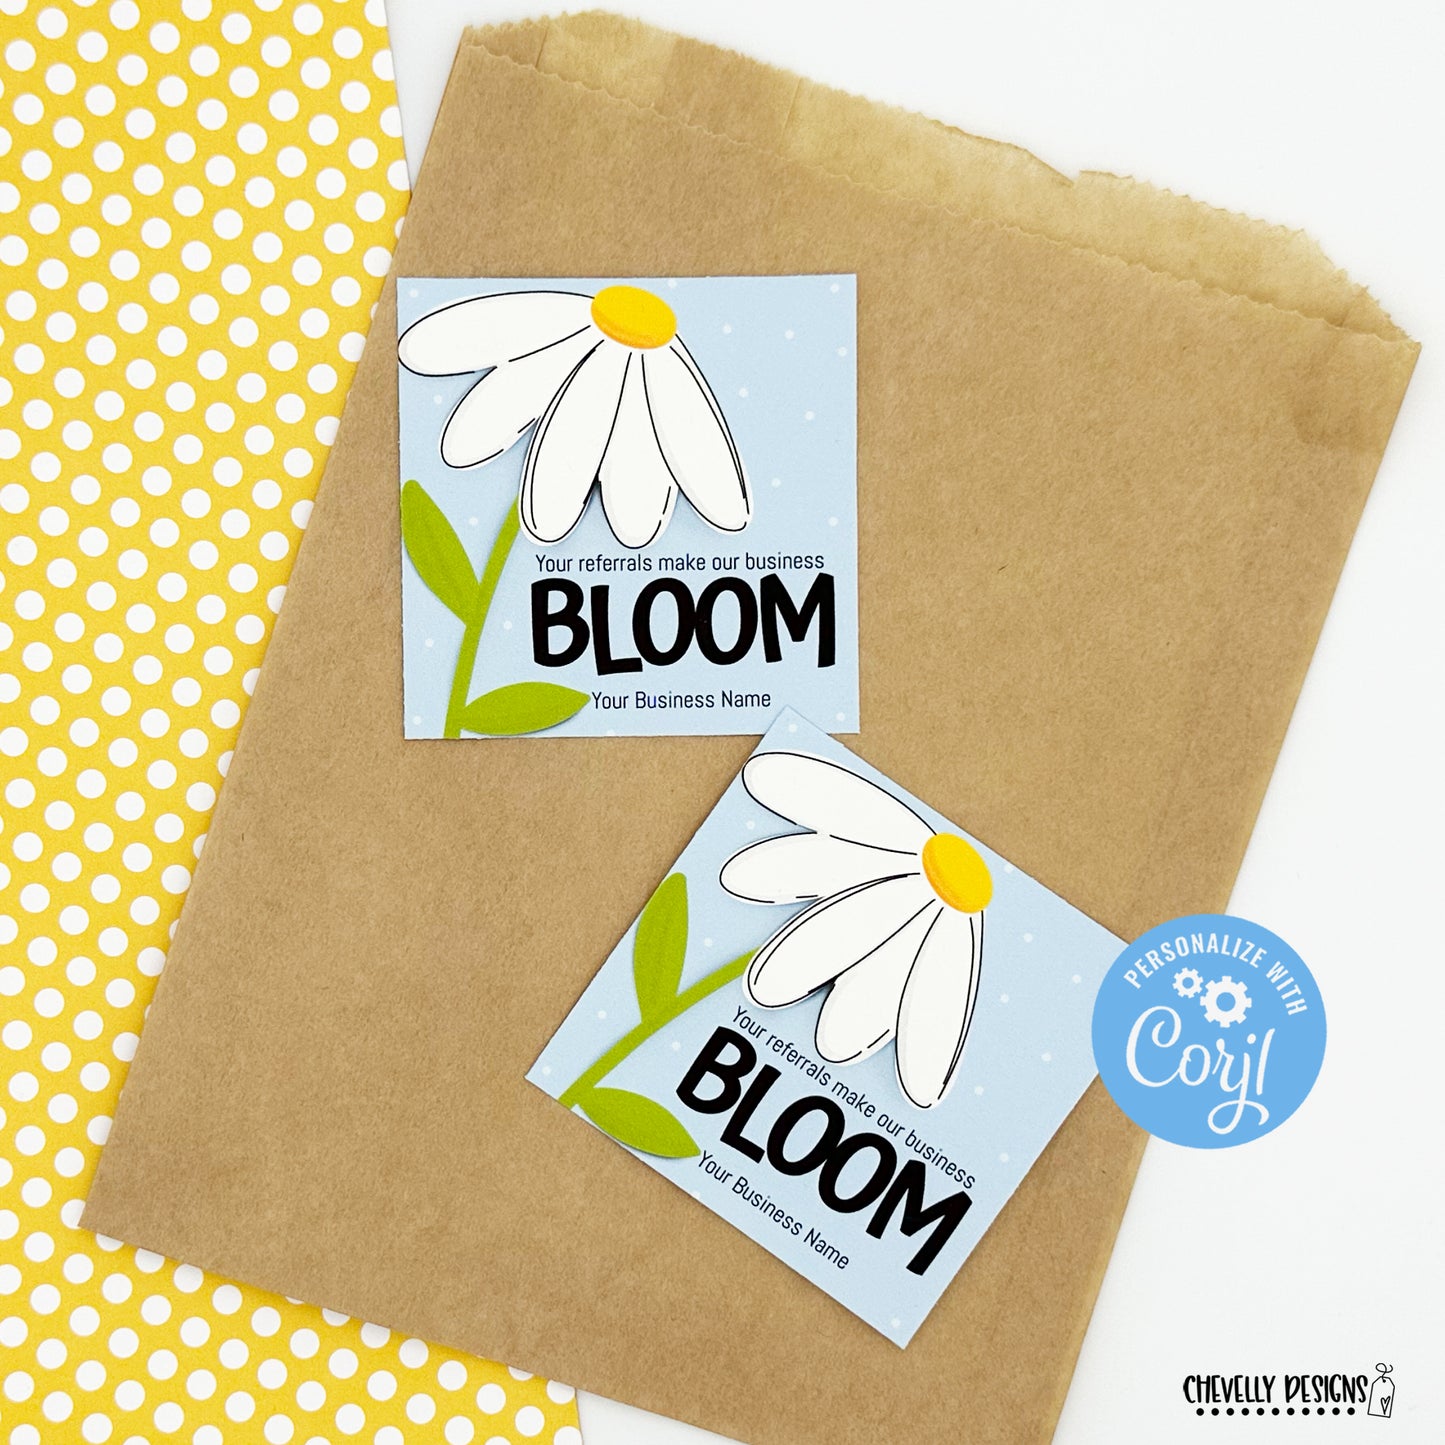 EDITABLE - Your Referrals Make Our Business Bloom - Printable Business Marketing Tags